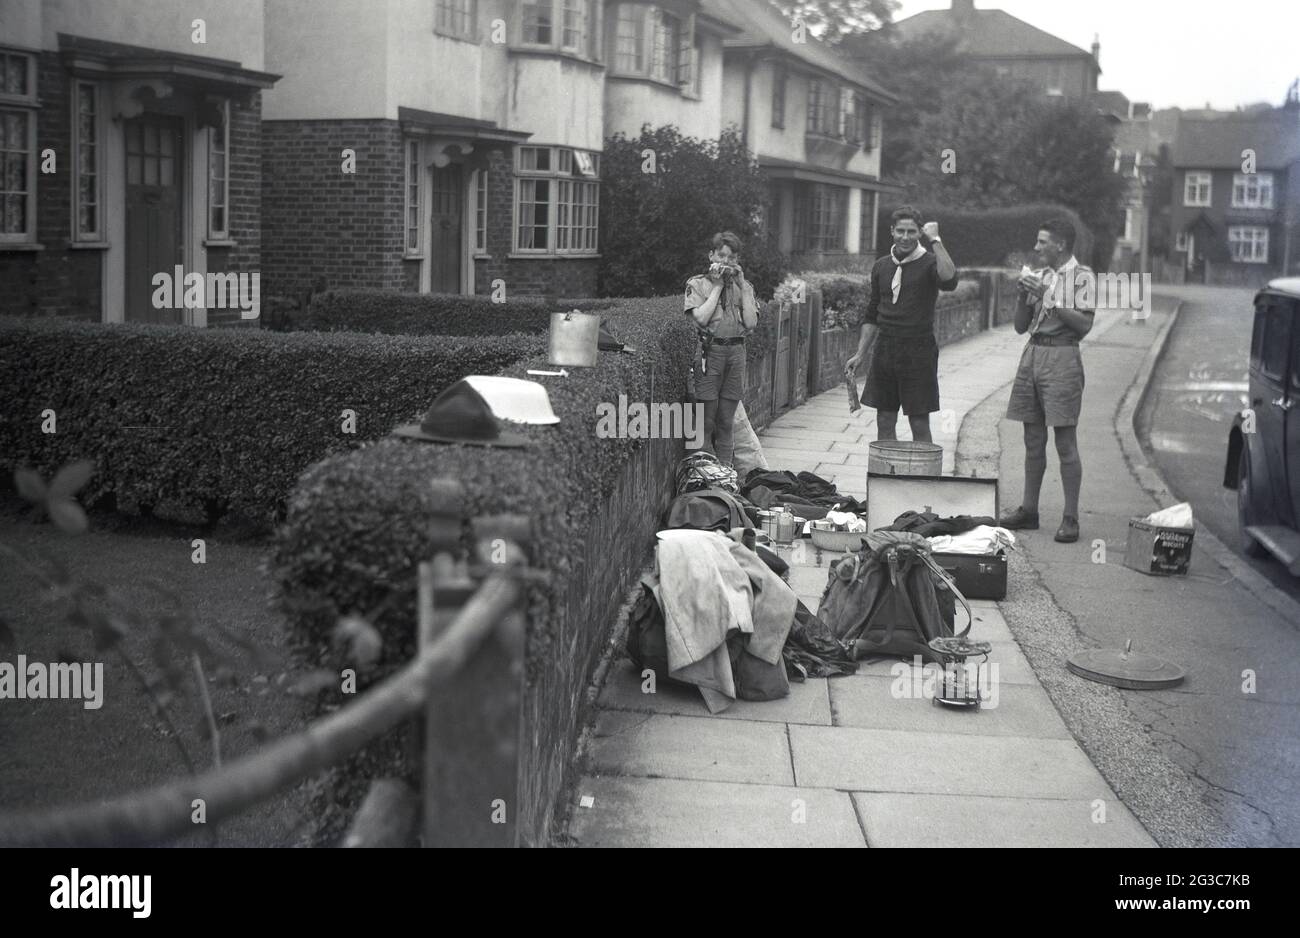 1951, historical, we made it!...outside in a suburban street, by a car of the era, two scout masters and one young scout, stand by their baggage and camping gear, pots and pans which are lying on the pavement. One of the men raise's a hand pump in salute to the successful end of their scout camp trip, England, UK. Stock Photo